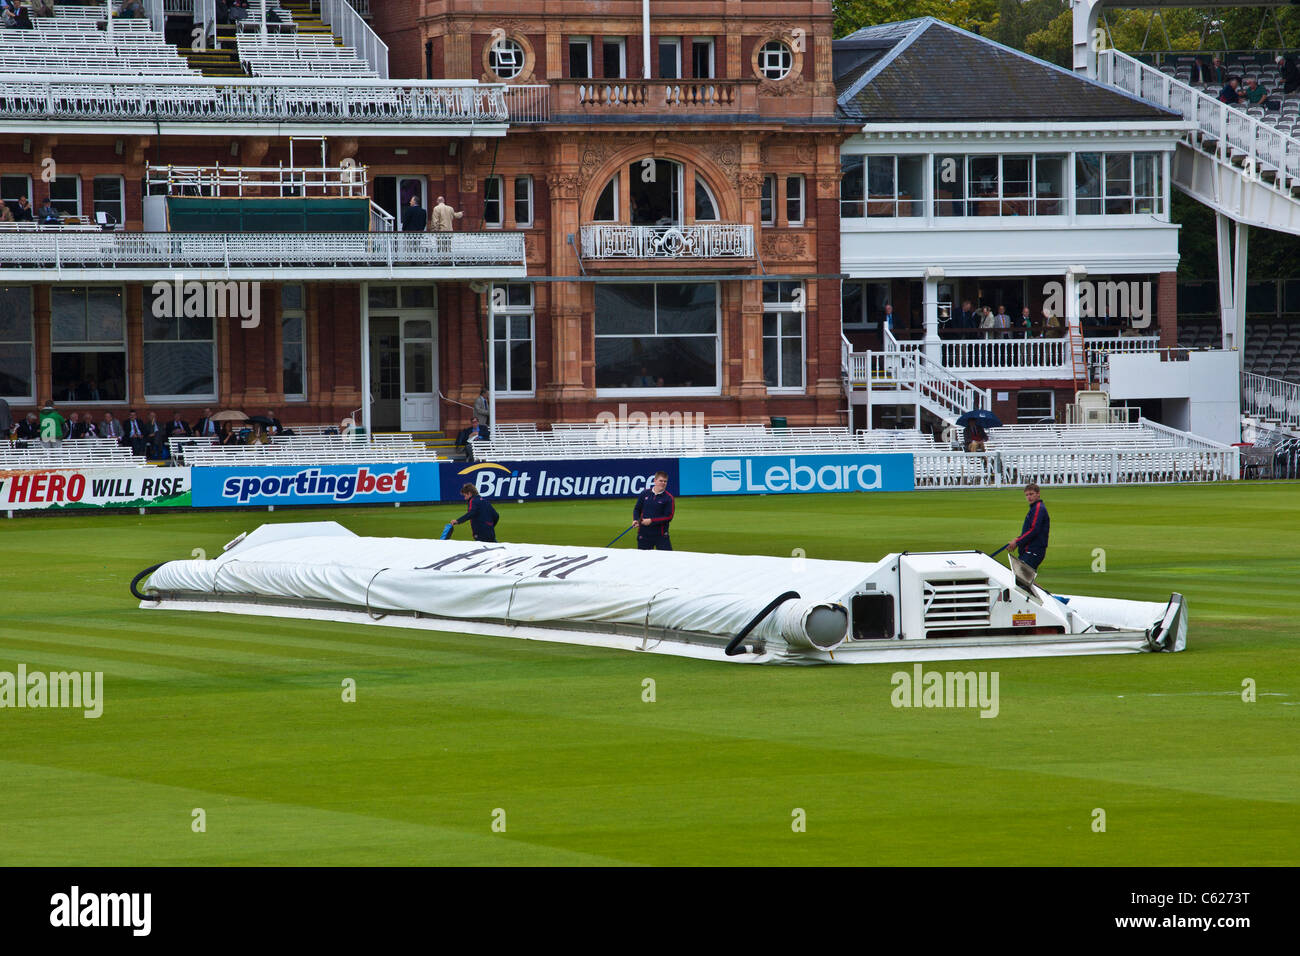 https://c8.alamy.com/comp/C6273T/hover-cover-at-lords-cricket-ground-C6273T.jpg